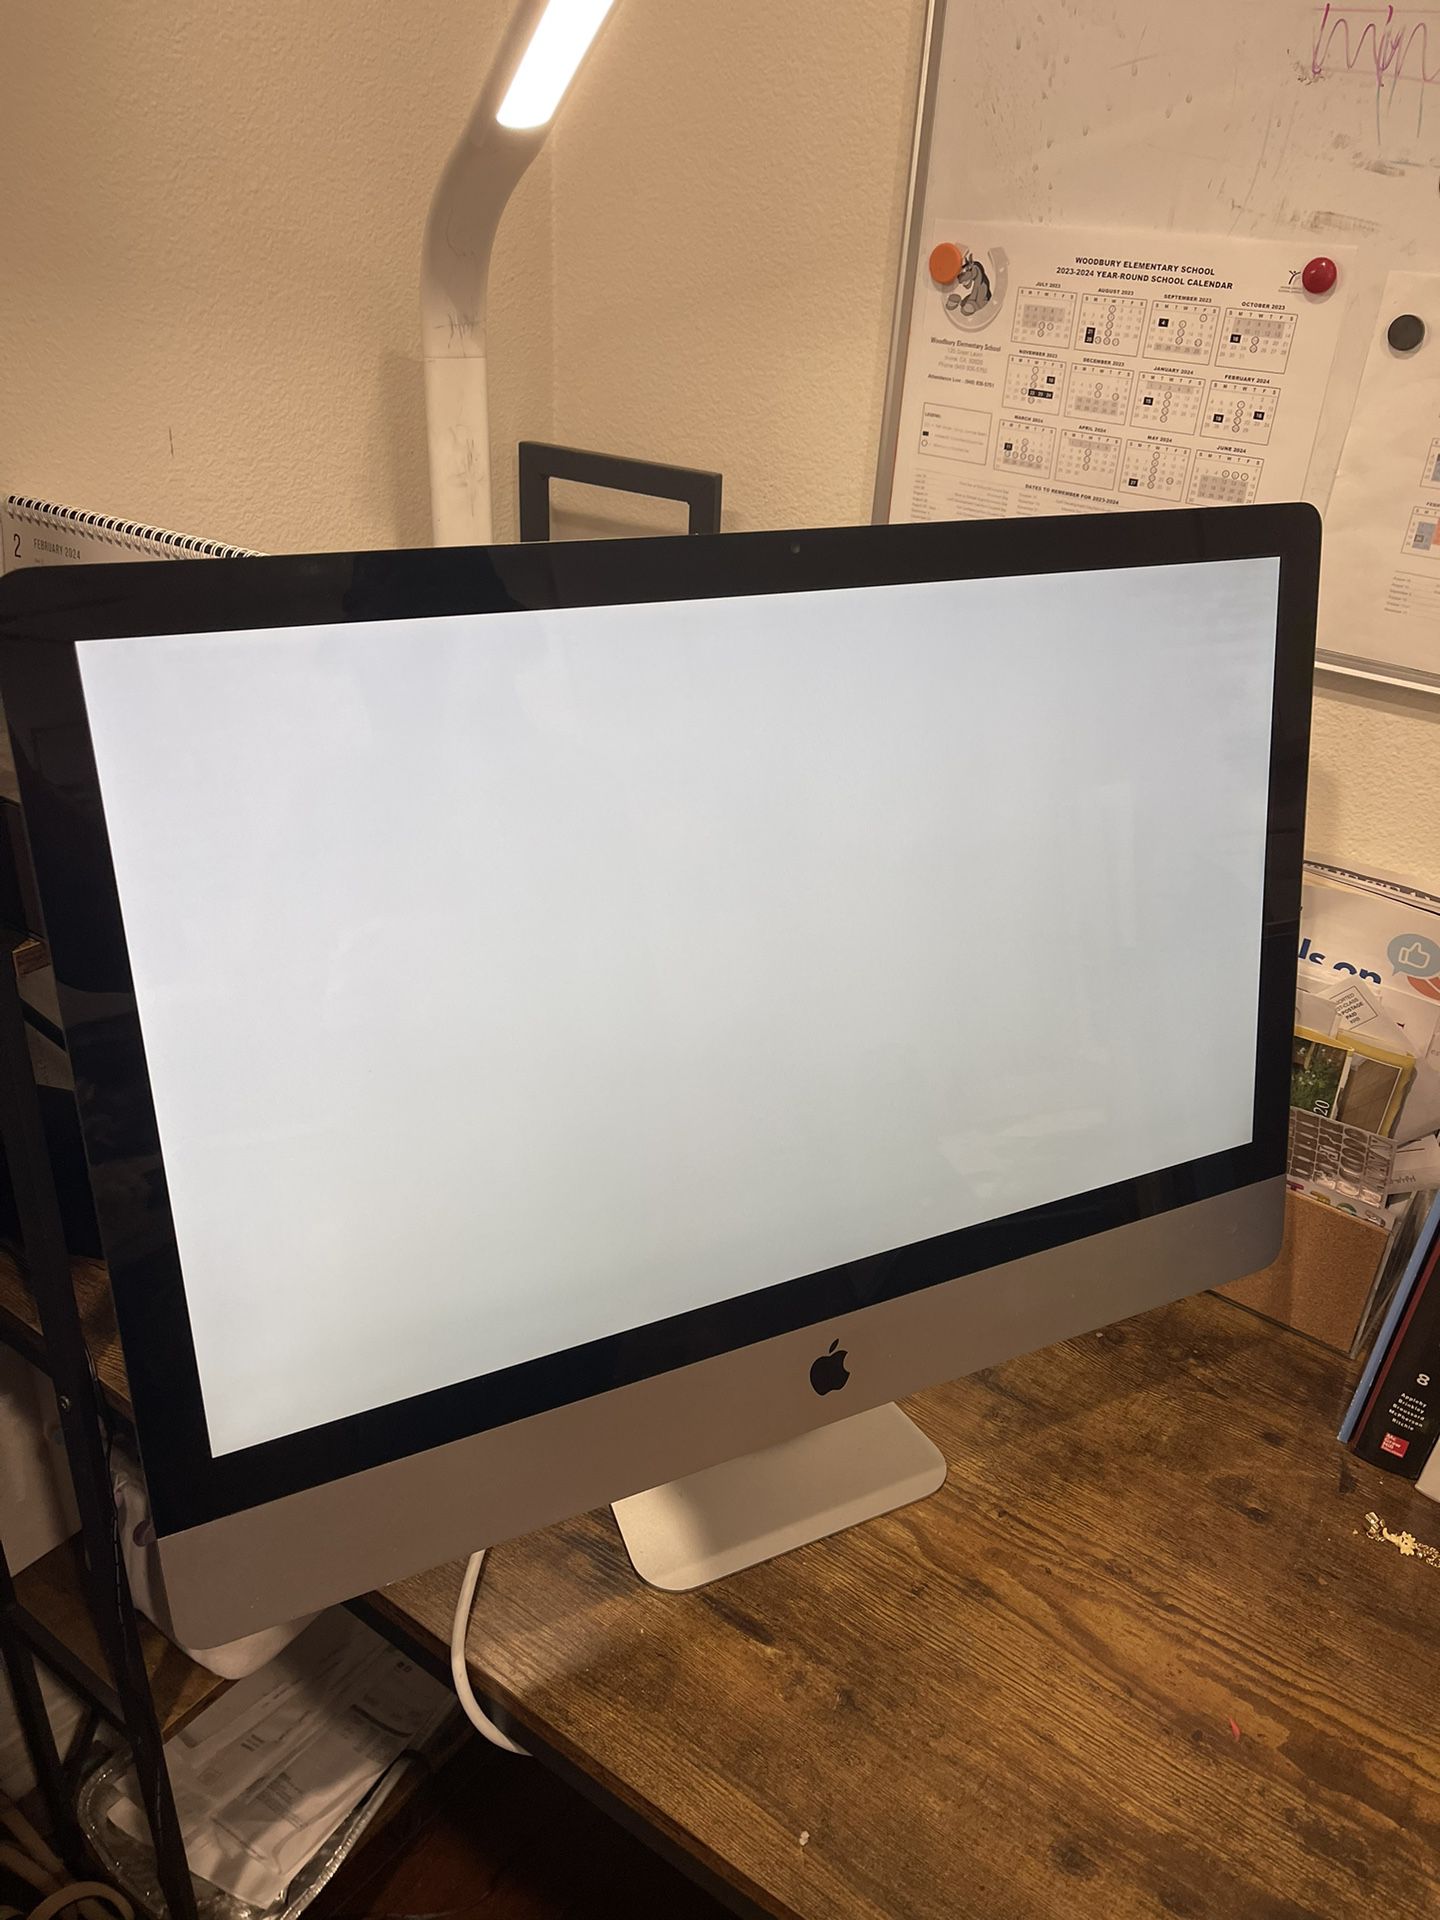 2011 iMac 27-inch Used, In Good Condition 